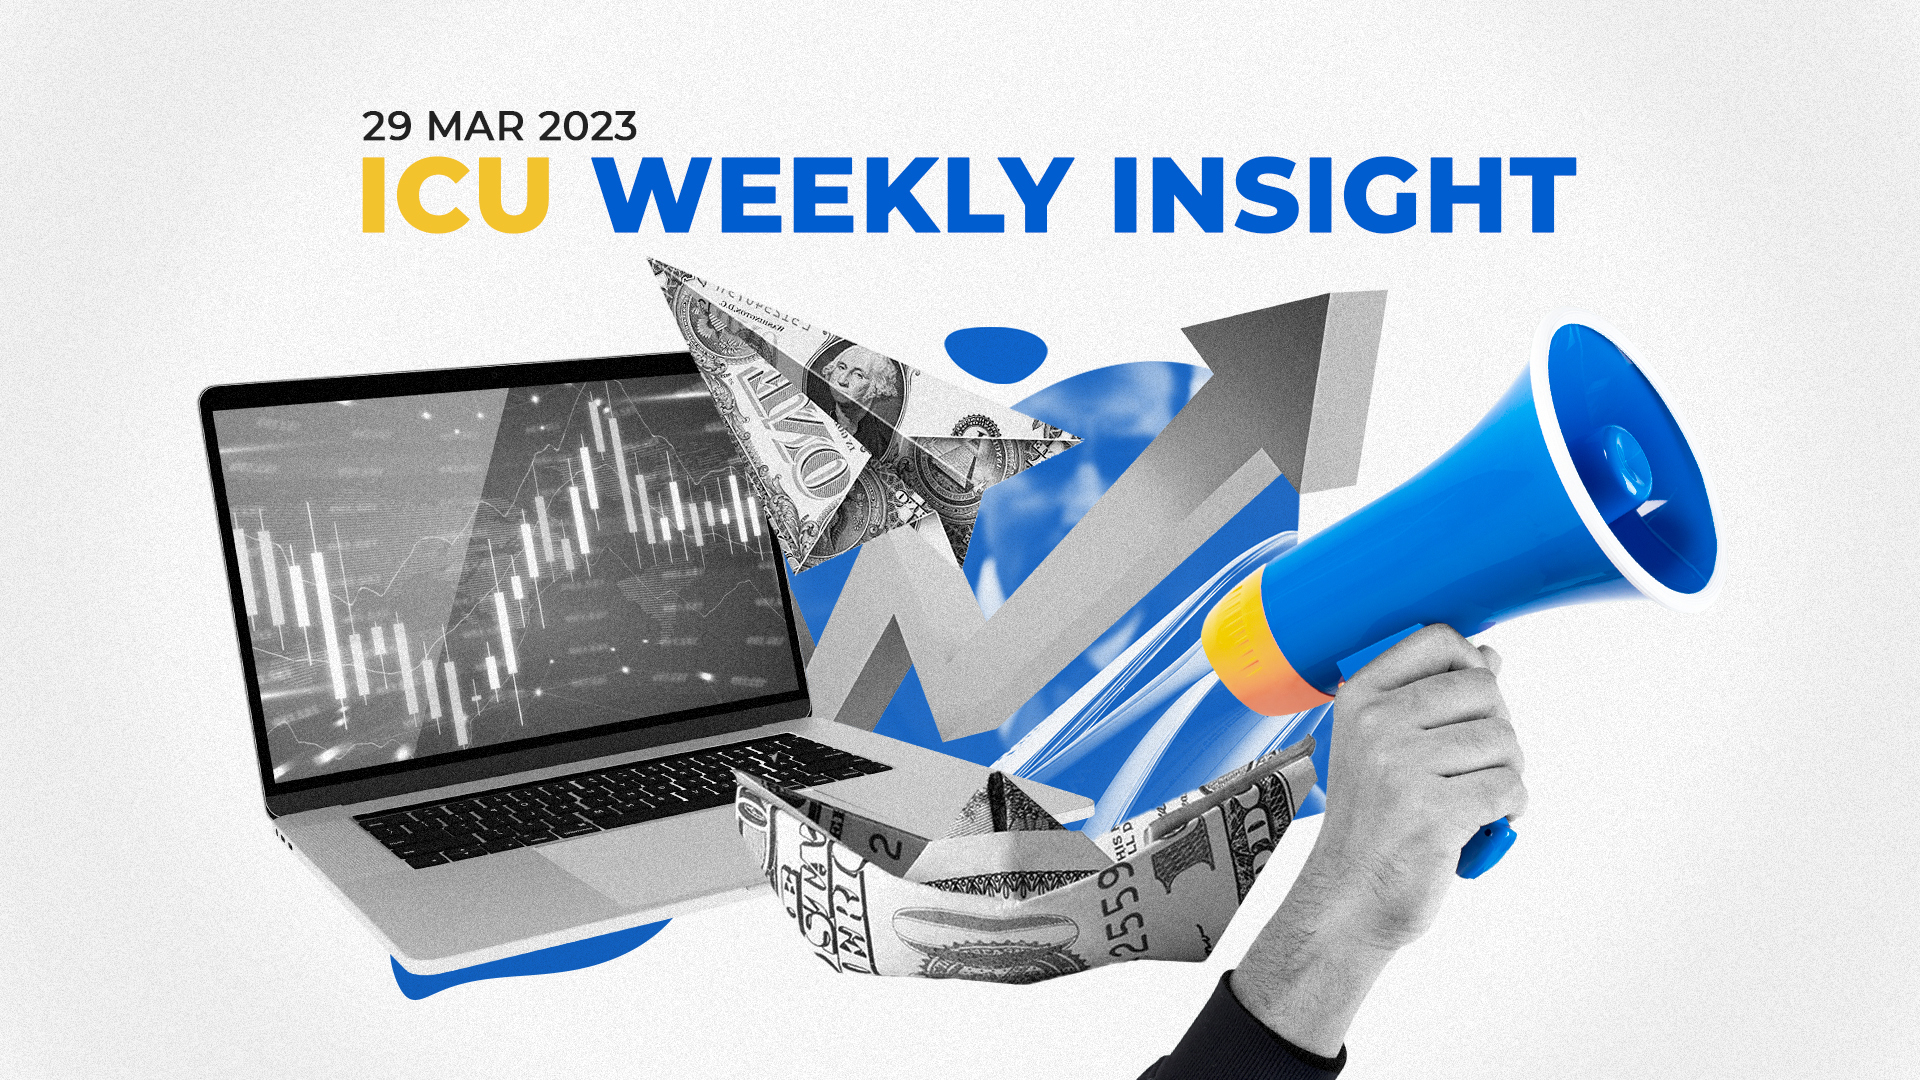 ICU Weekly Insight: Monday, 29 March 2023